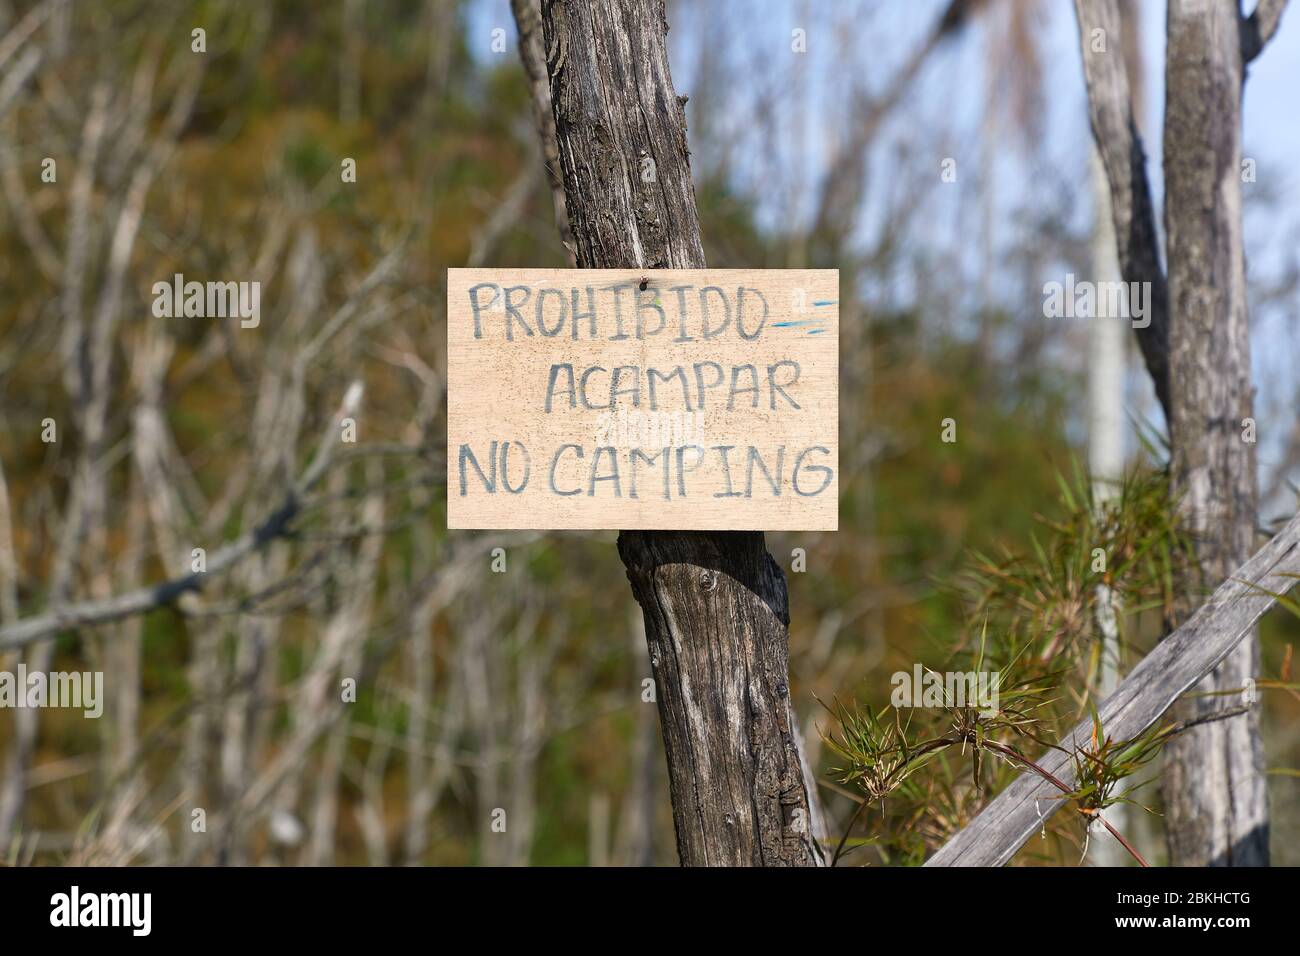 No camping sign on a tree in Spanish and English Stock Photo